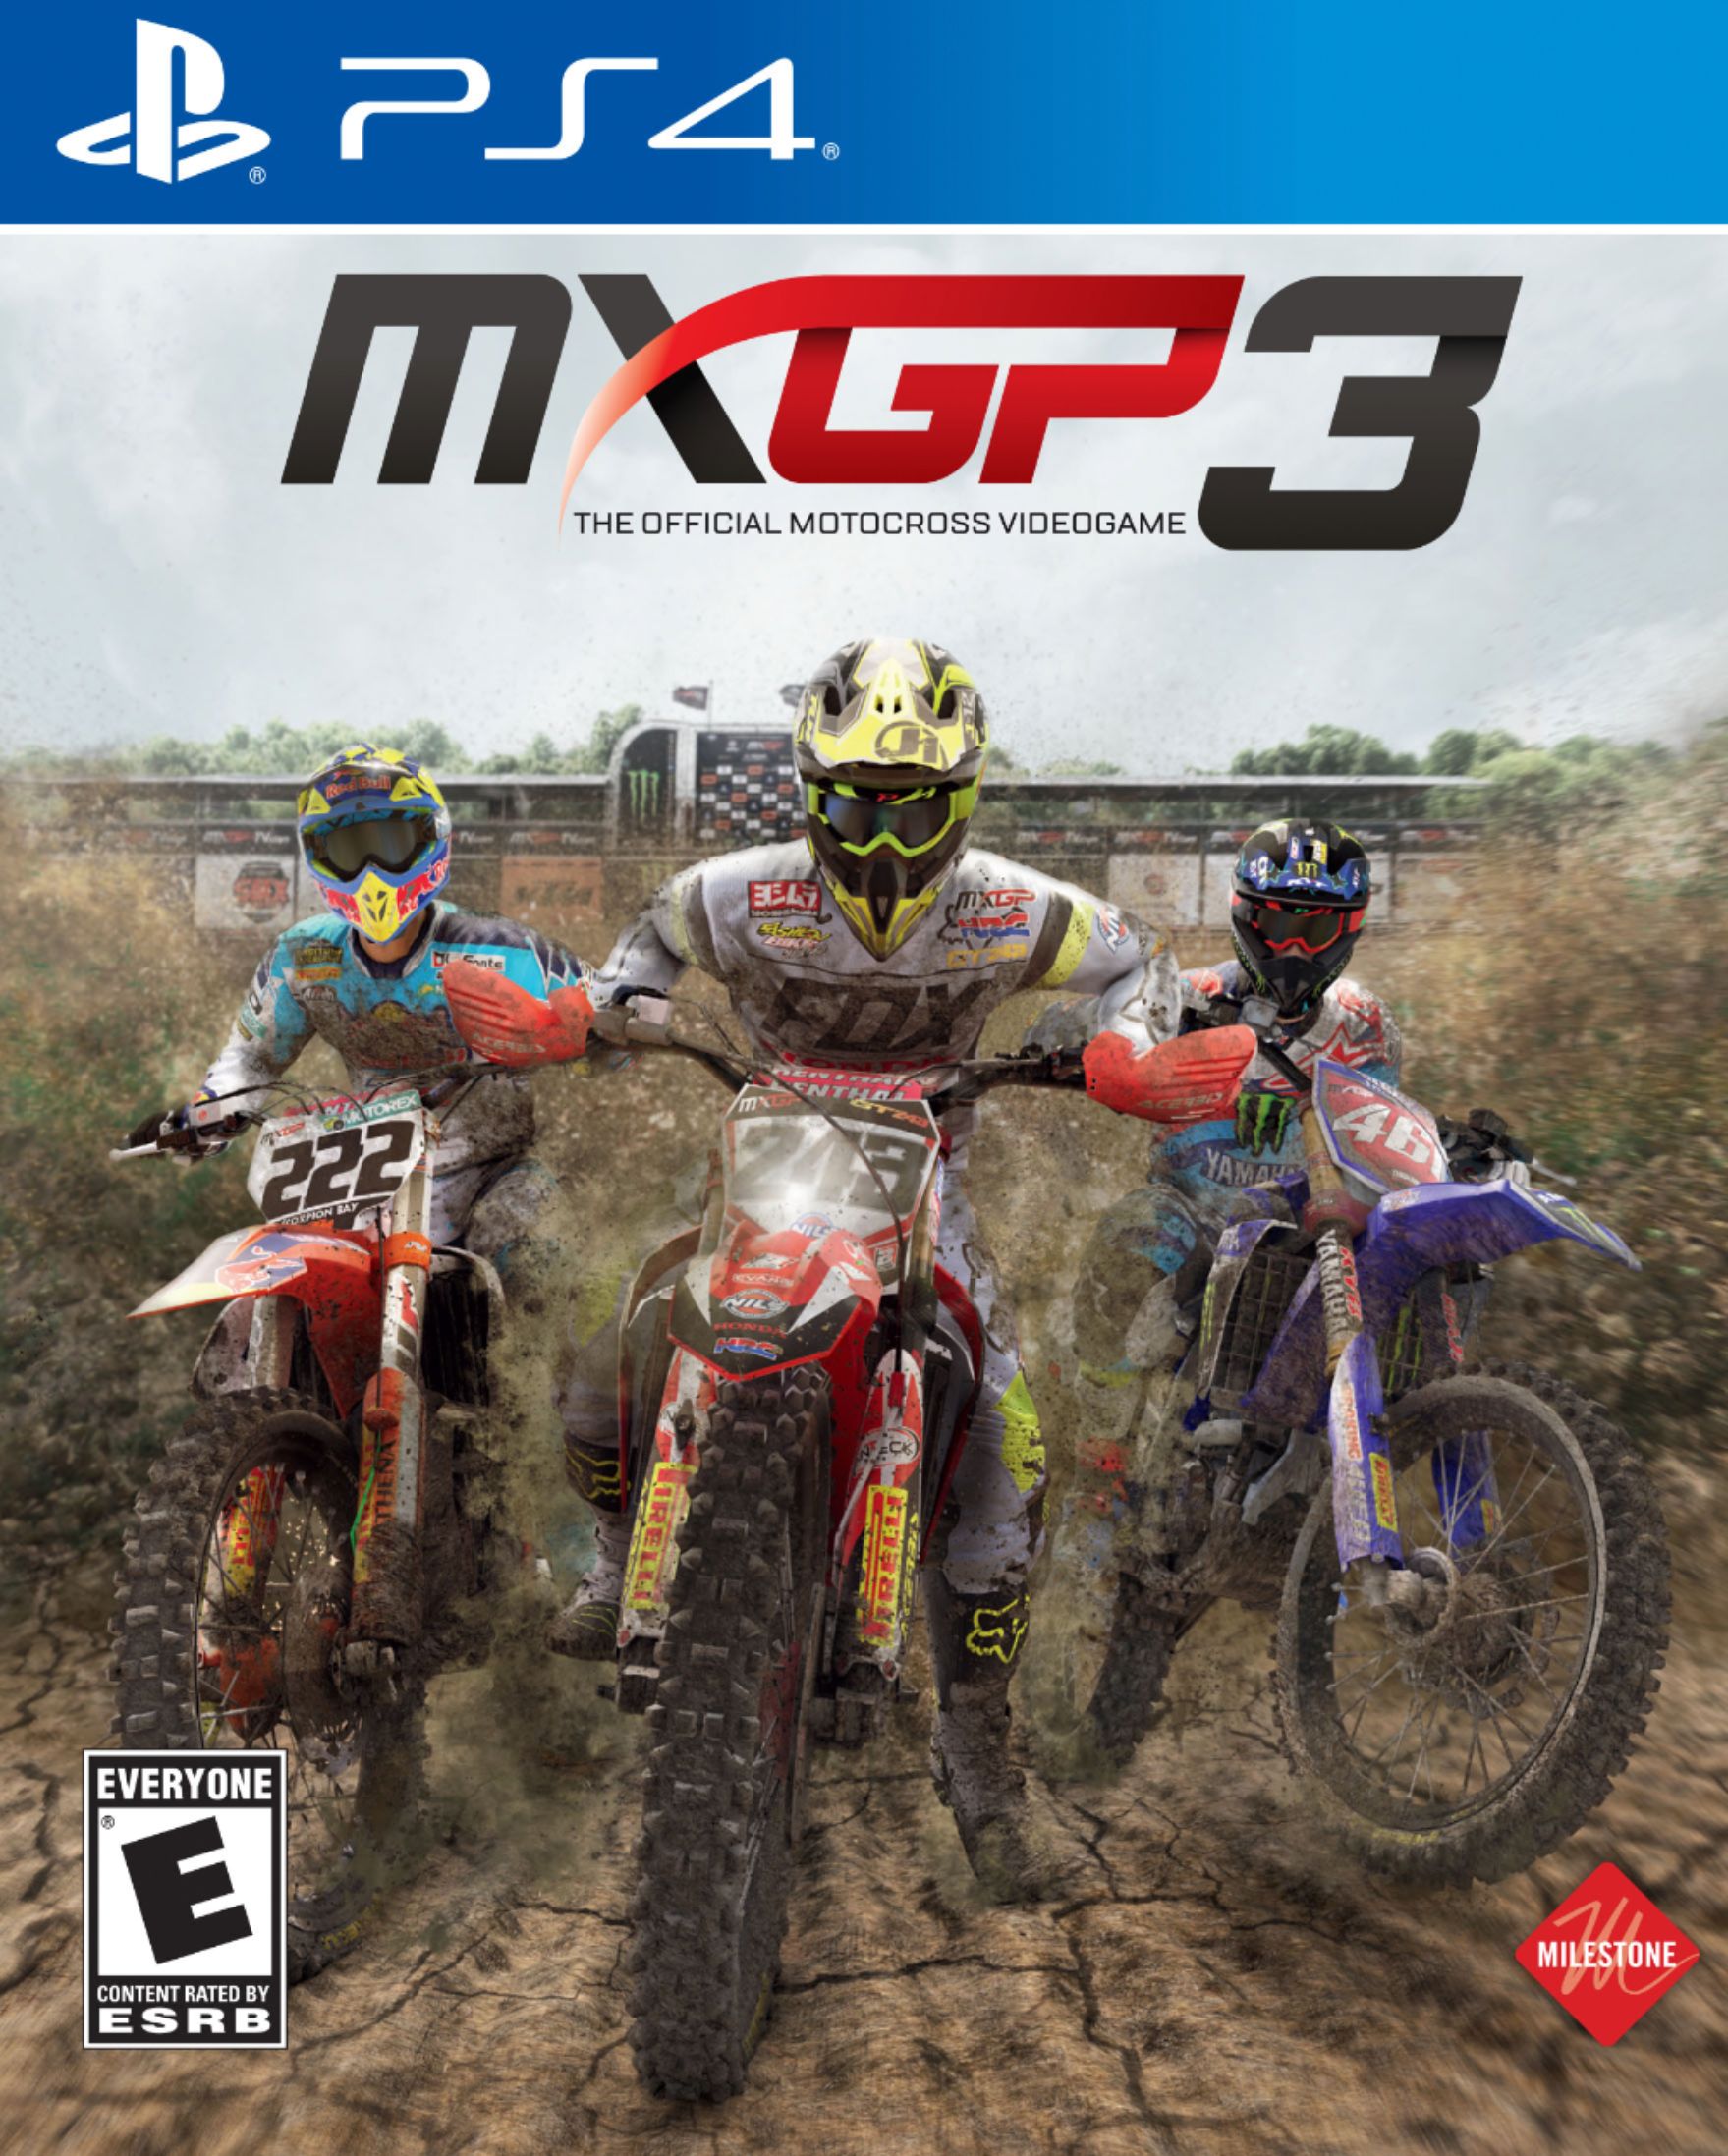 MXGP 3 The Official Motocross Videogame Standard Edition PlayStation 4 91966